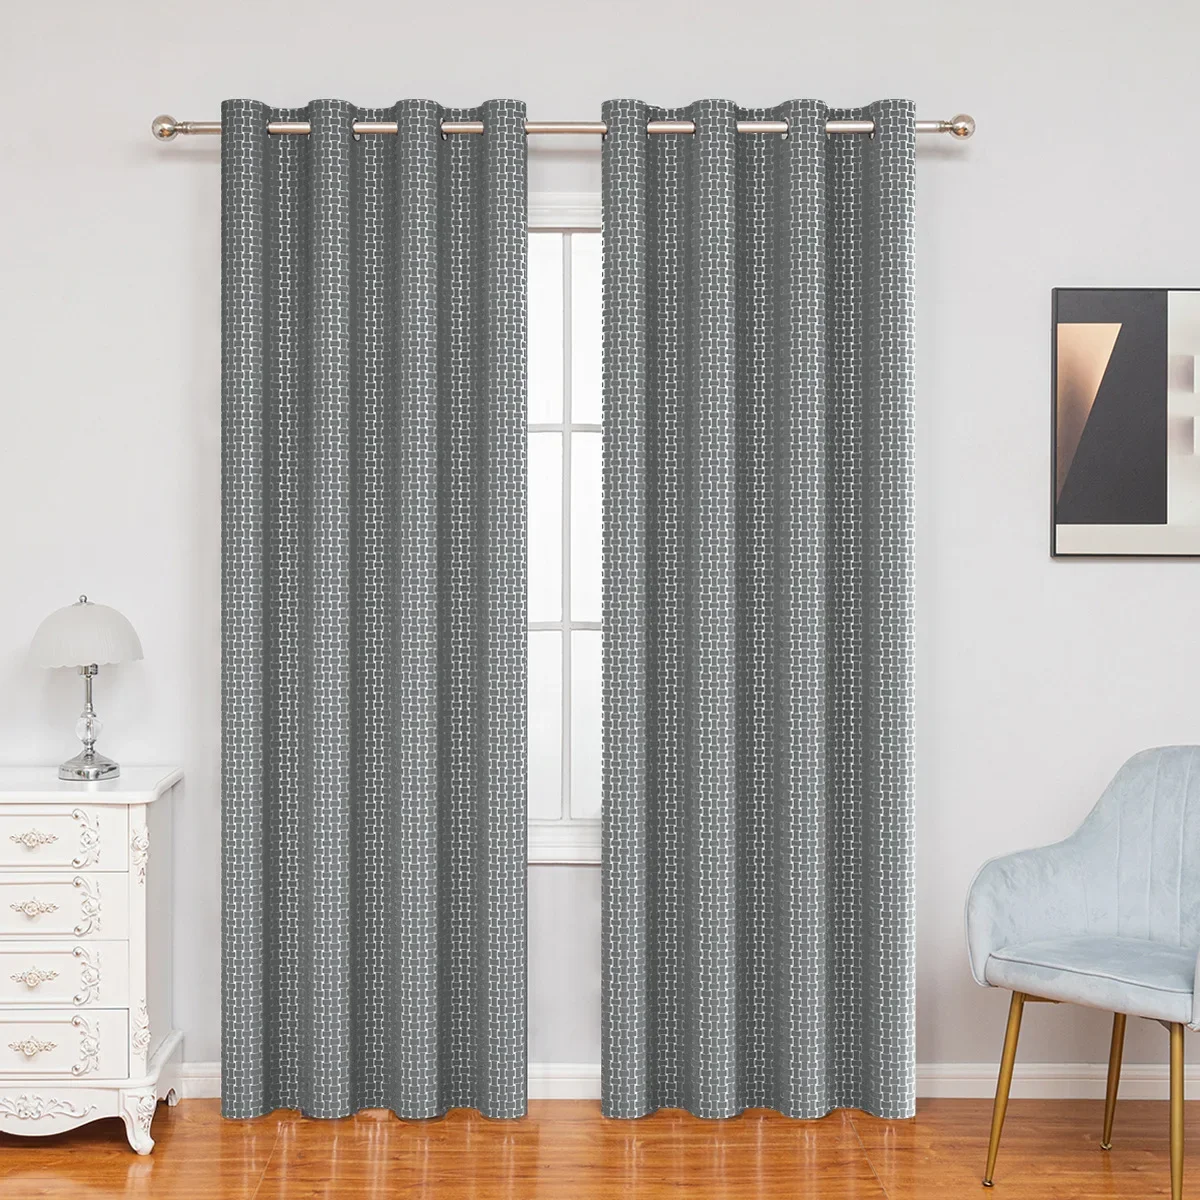 

FF1116 Bedroom blackout curtain fabric high precision hot silver small square blackout perforated curtain